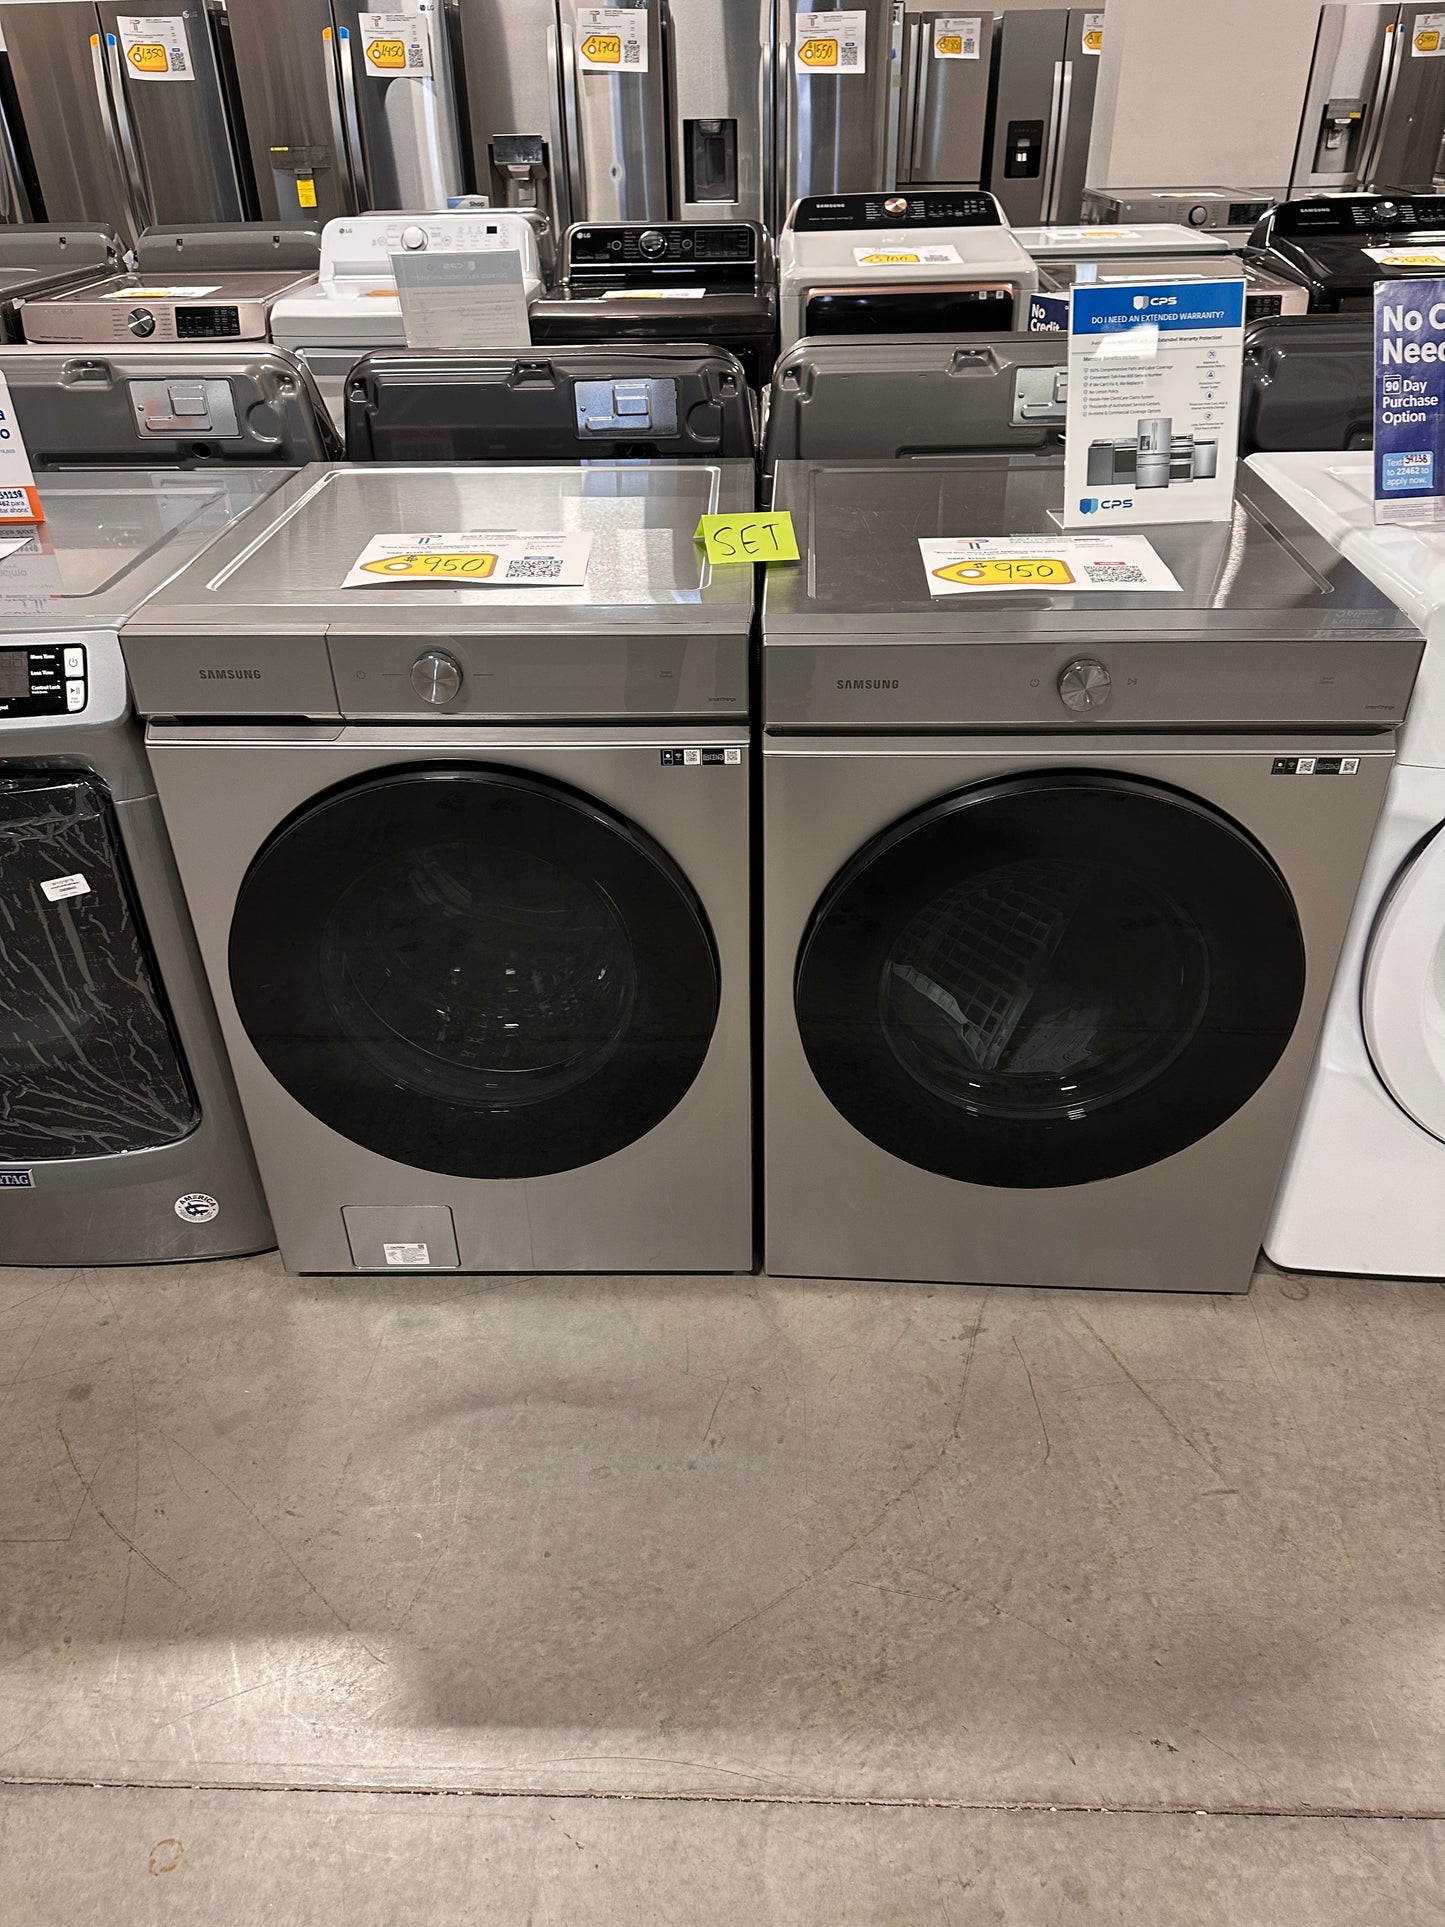 GORGEOUS SAMSUNG STACKABLE WASHER DRYER SET - WAS13010 WF53BB8700ATUS - DRY12317 DVE53BB8700TA3